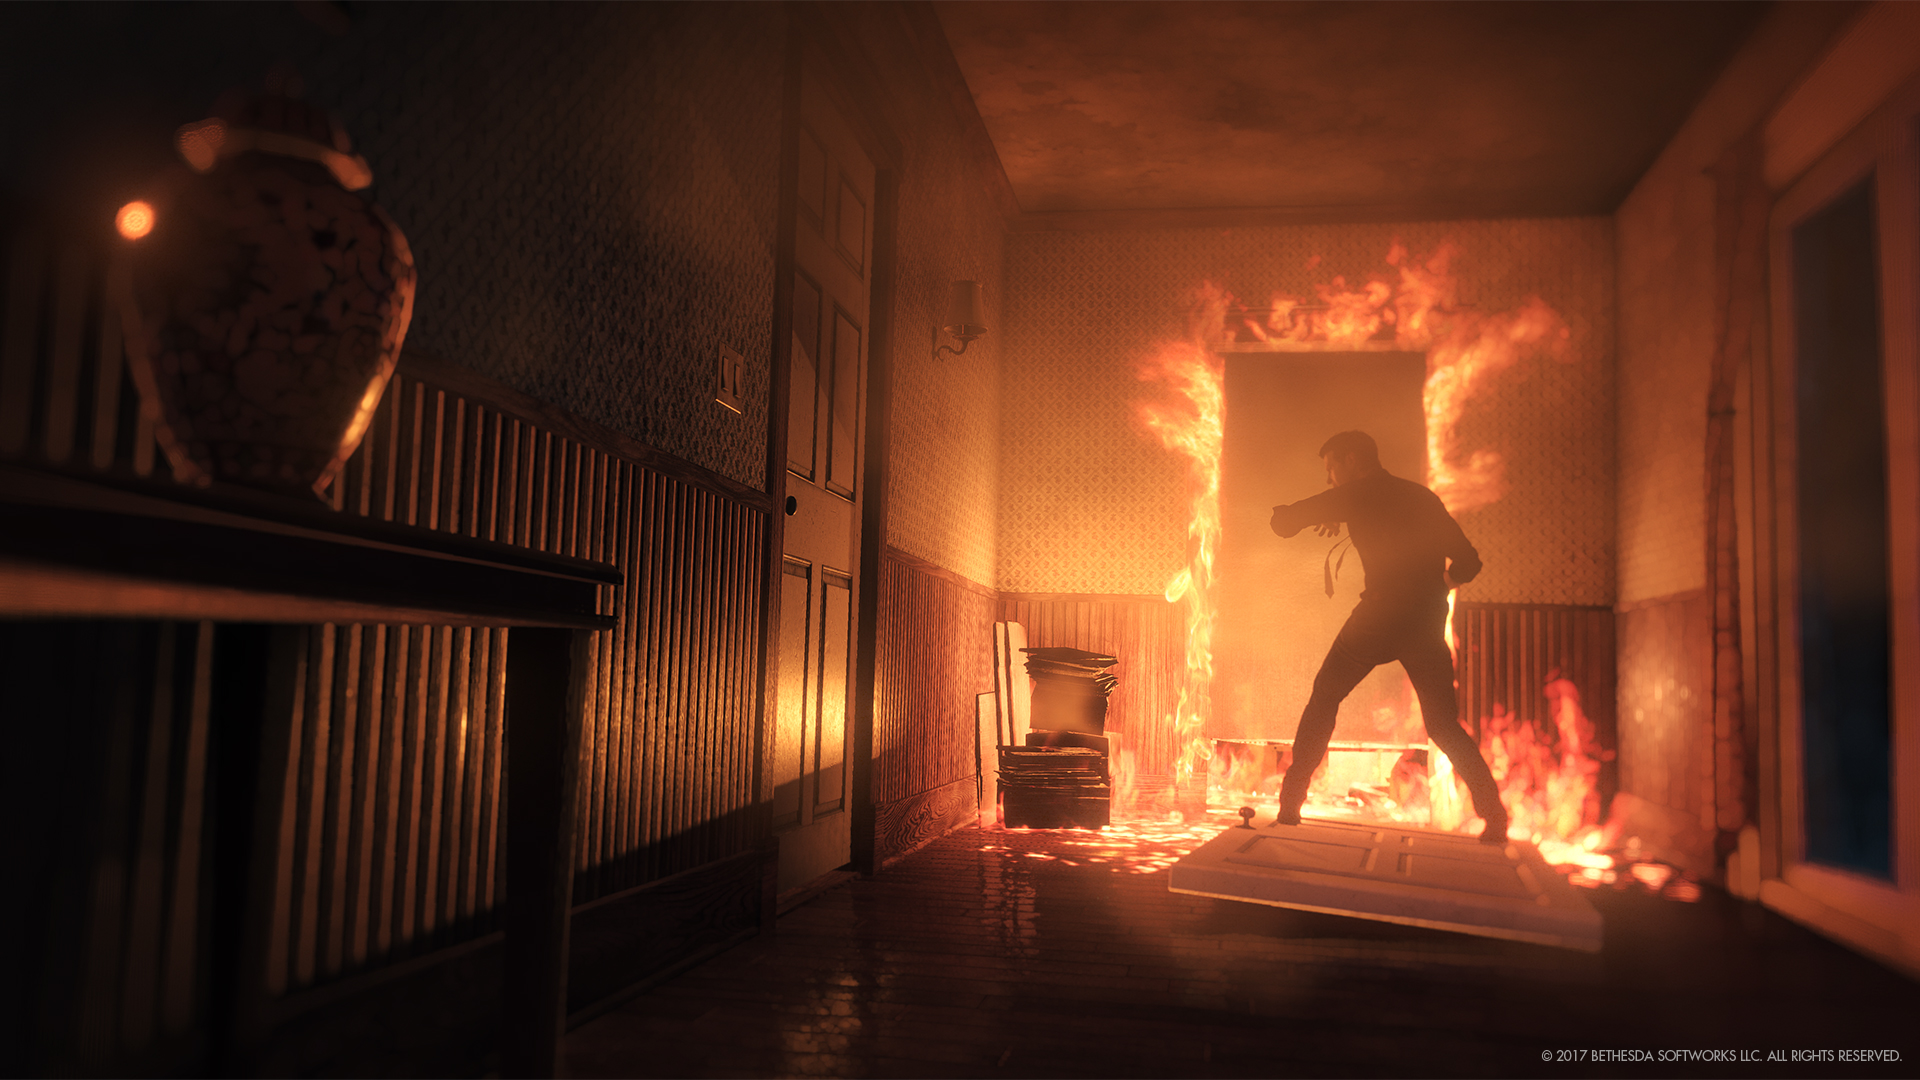 Media asset in full size related to 3dfxzone.it news item entitled as follows: Bethesda aggiunge la modlit di gioco in prima persona al game The Evil Within 2 | Image Name: news27879_The-Evil-Within-2-Screenshot_1.jpg